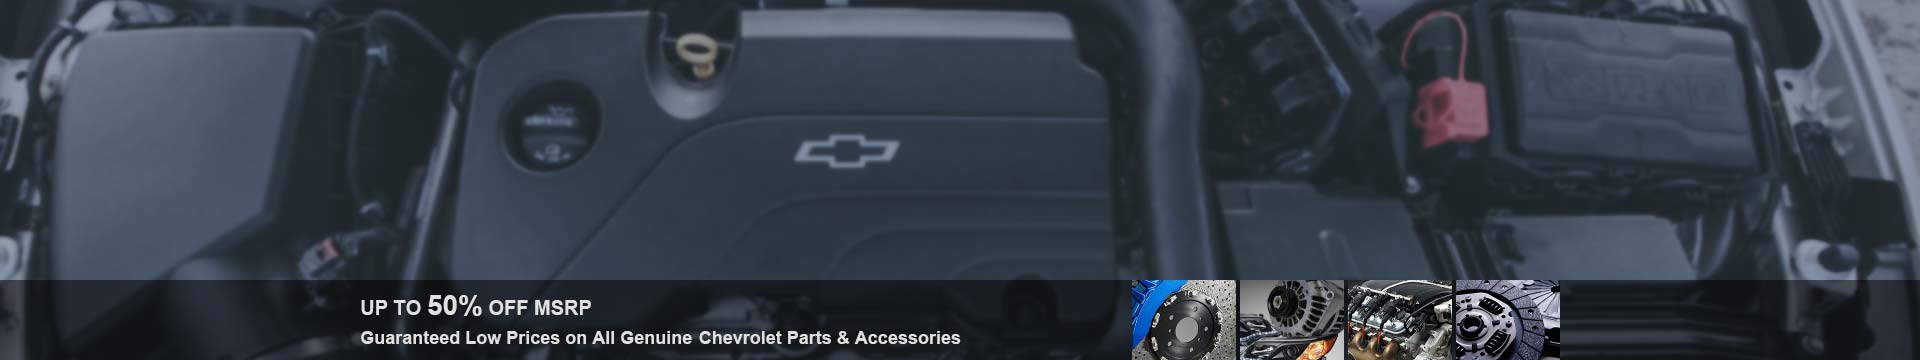 Guaranteed low prices on all Genuine Chevrolet S10 parts